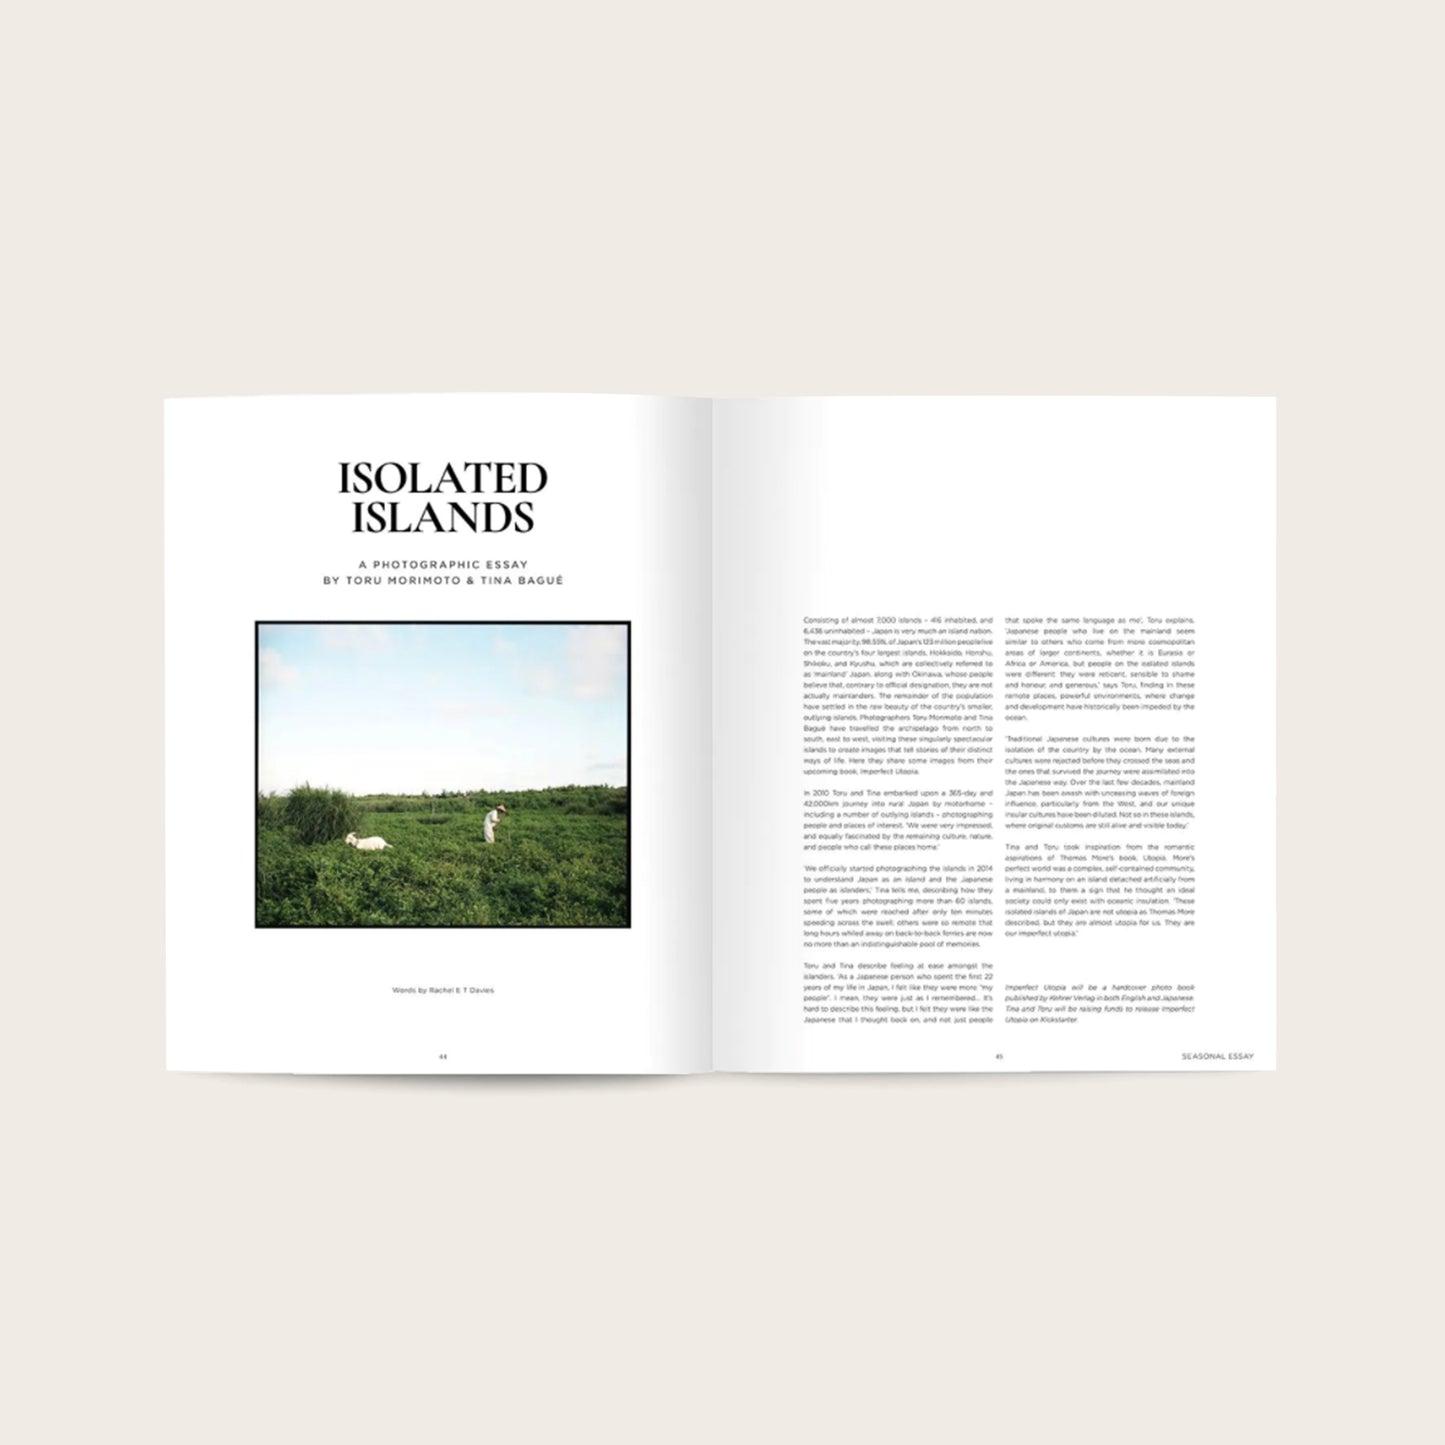 Storied #2 - The Island Issue